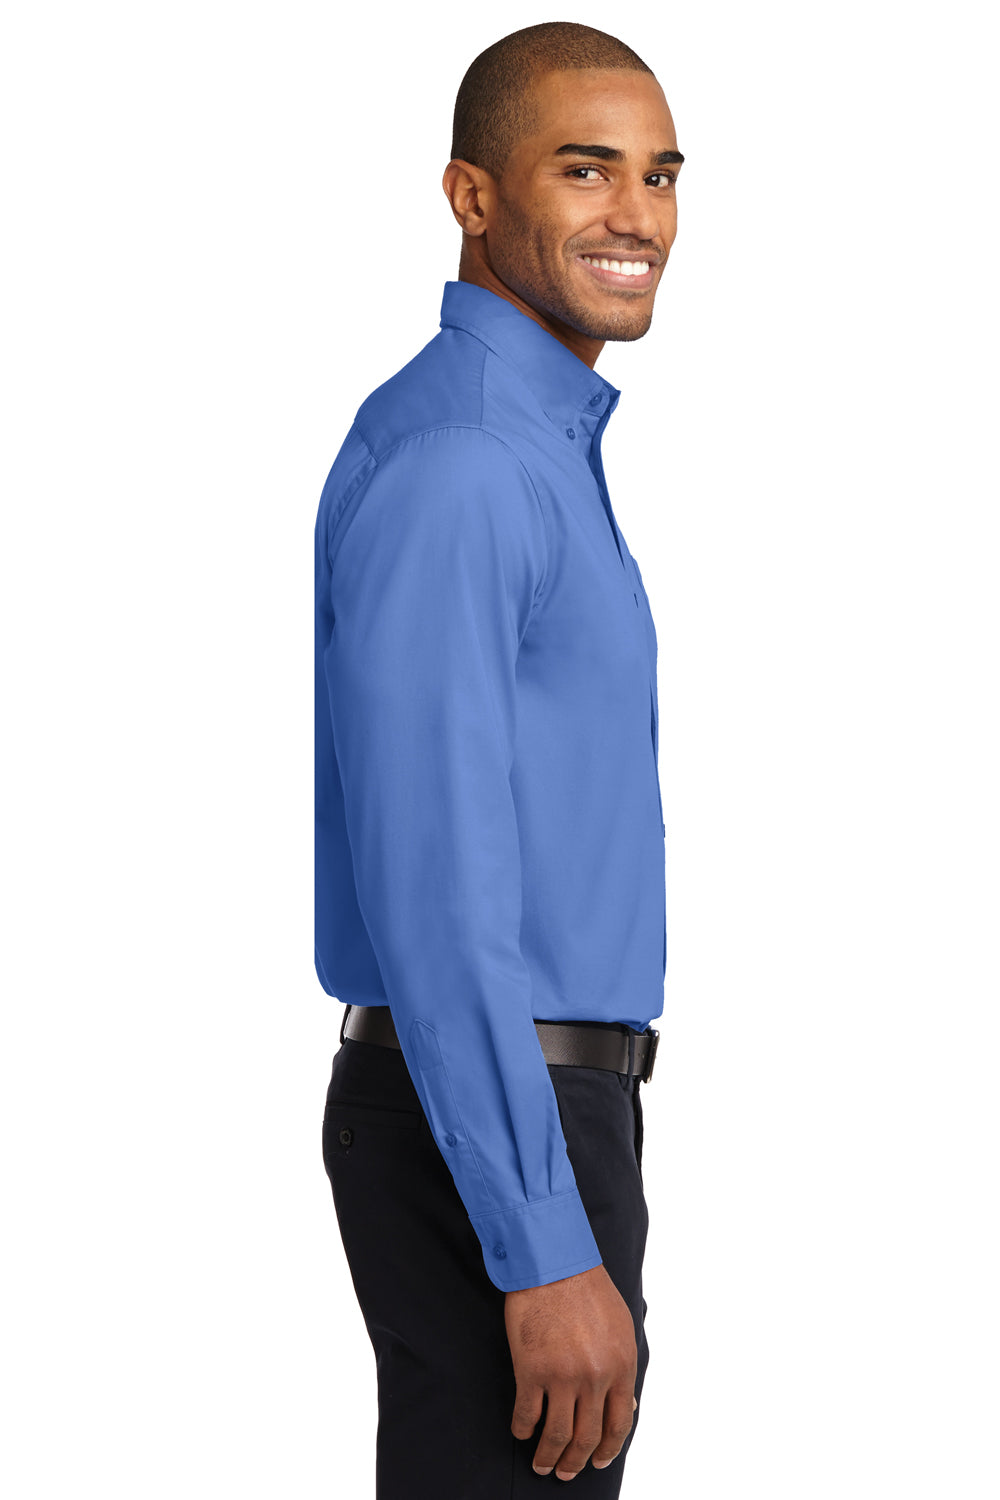 Port Authority S608/TLS608/S608ES Mens Easy Care Wrinkle Resistant Long Sleeve Button Down Shirt w/ Pocket Ultramarine Blue Side